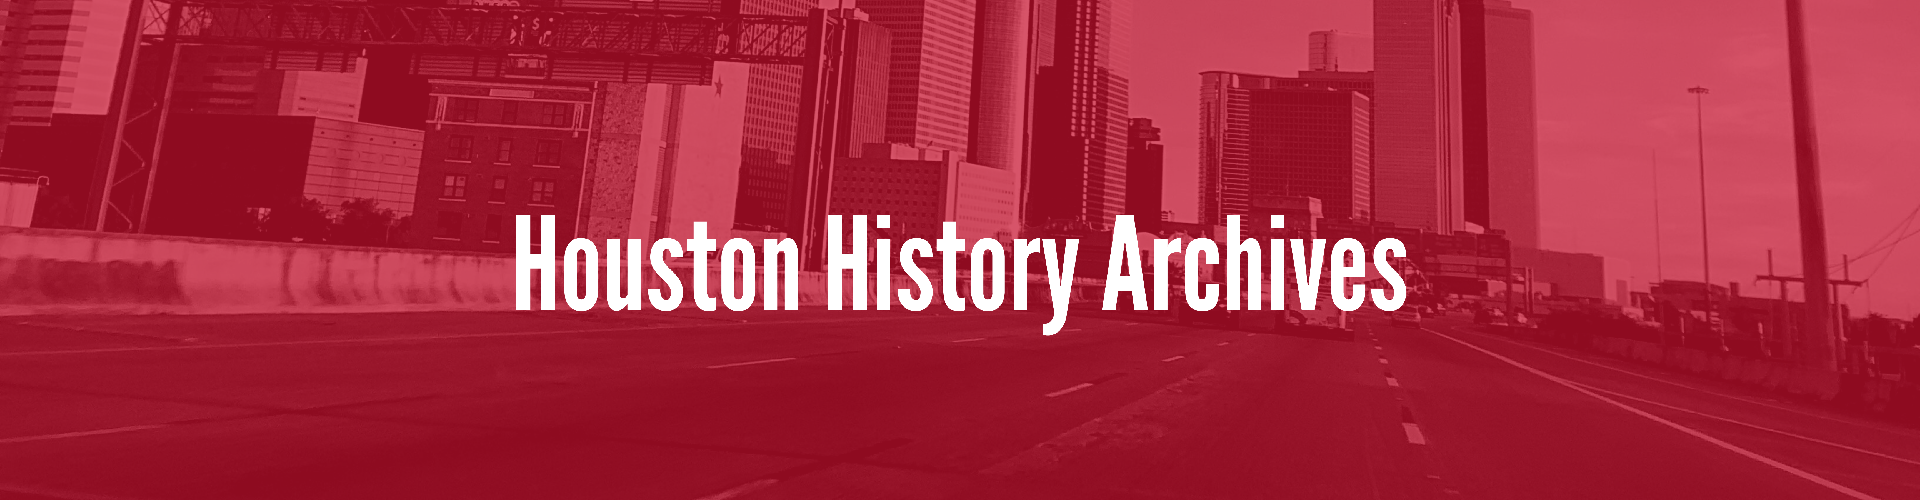 houston-history-archives-1.png